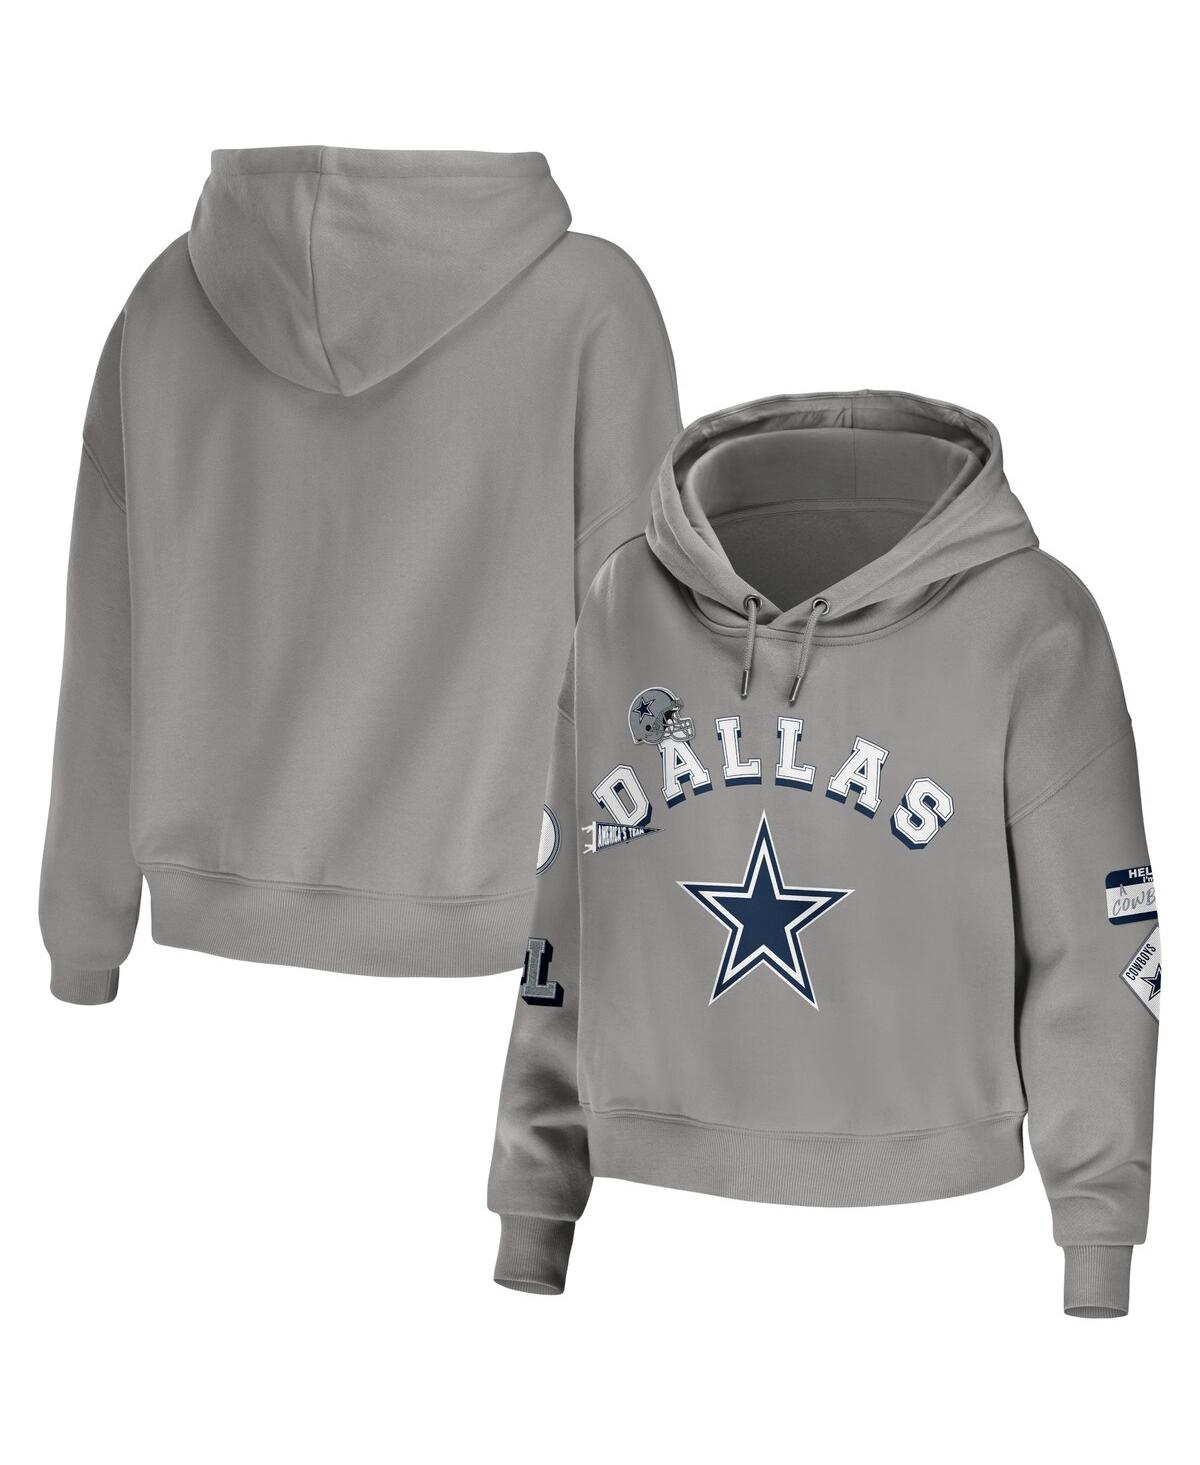 Shop Wear By Erin Andrews Women's  Gray Dallas Cowboys Modest Cropped Pullover Hoodie